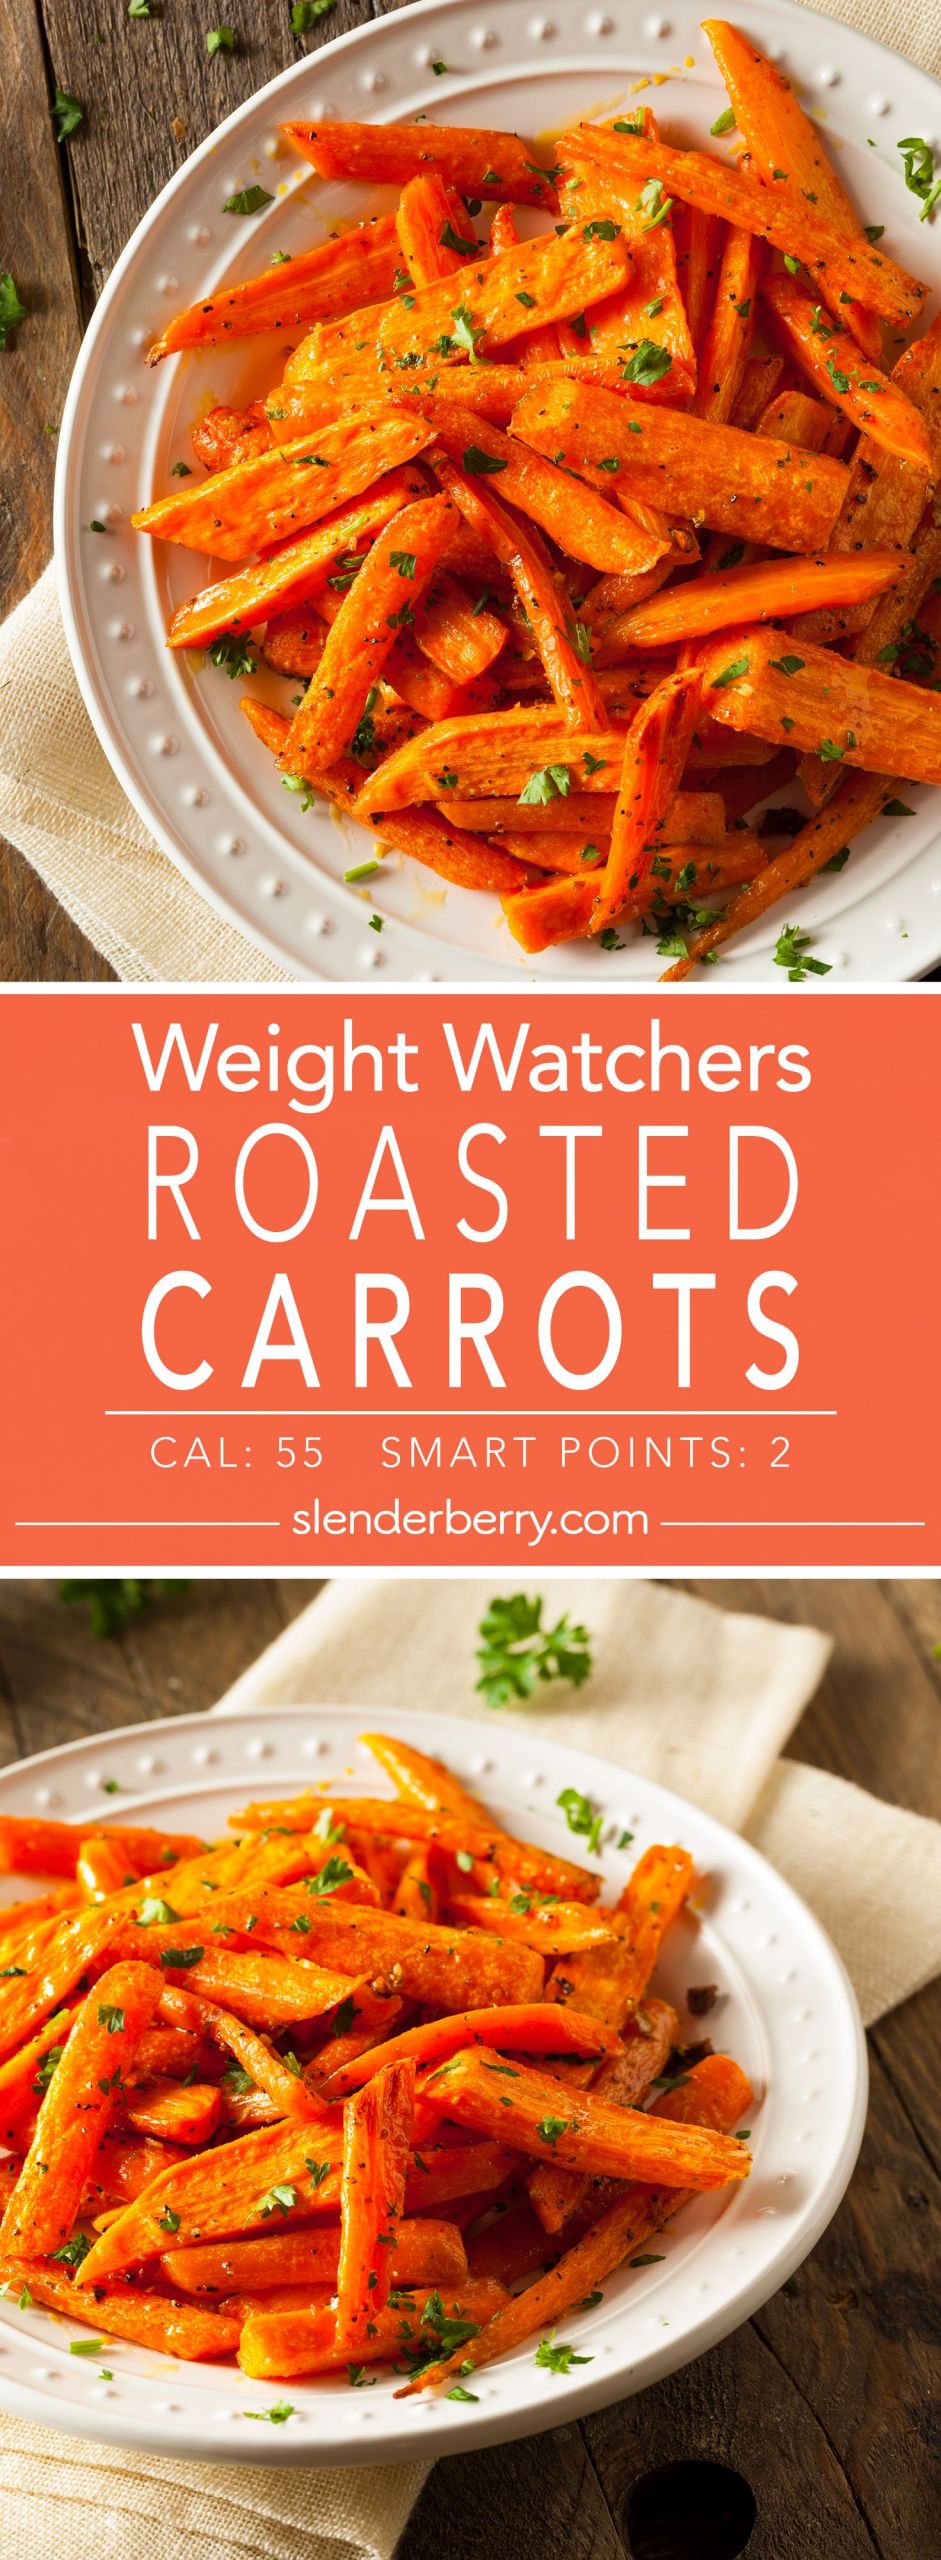 Low Calorie Carrot Recipes
 Roasted Carrots Recipe With images